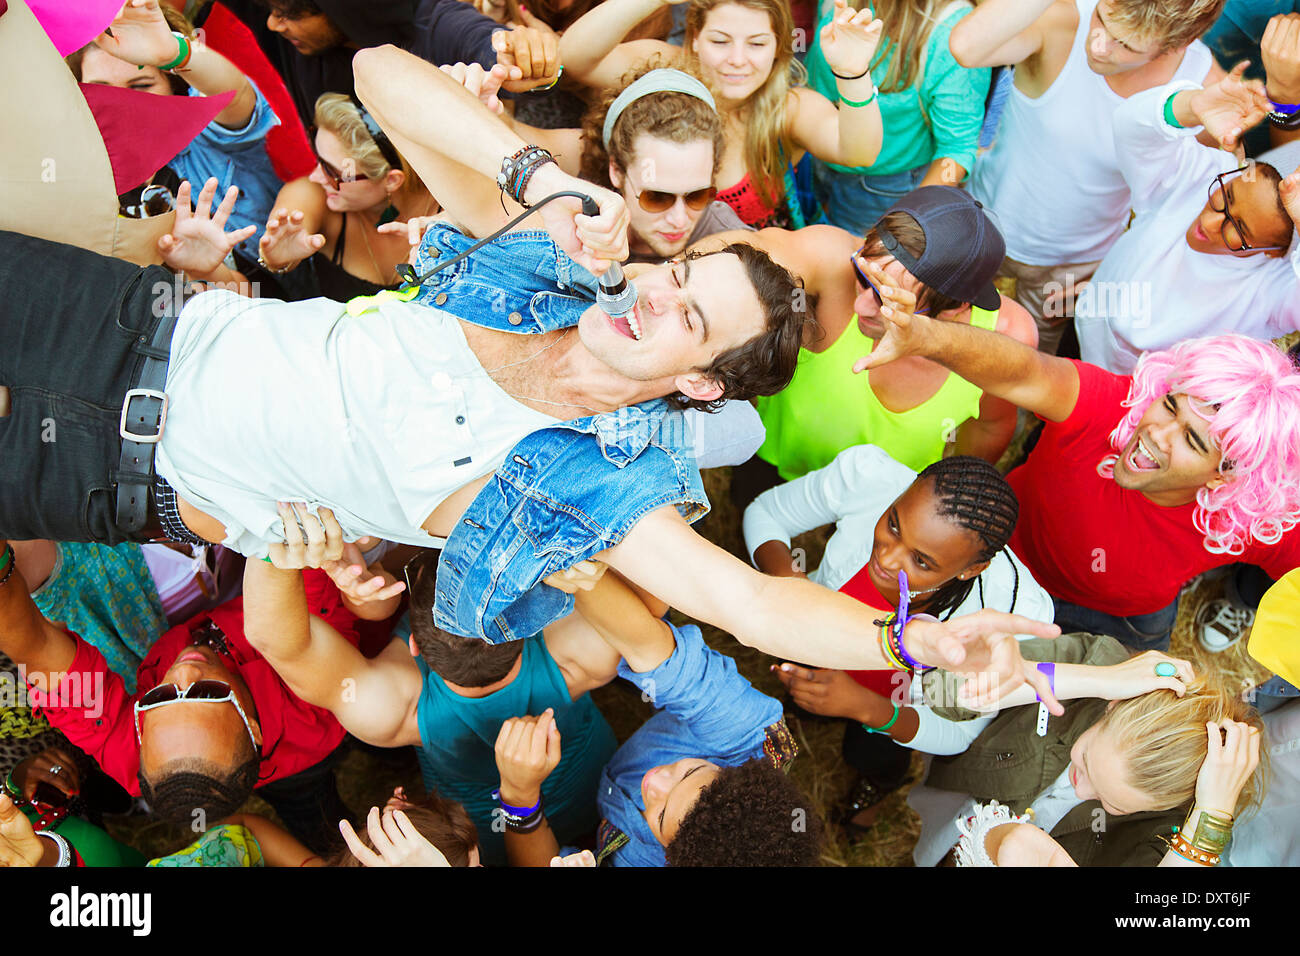 Performer with microphone crowd surfing at music festival Stock Photo